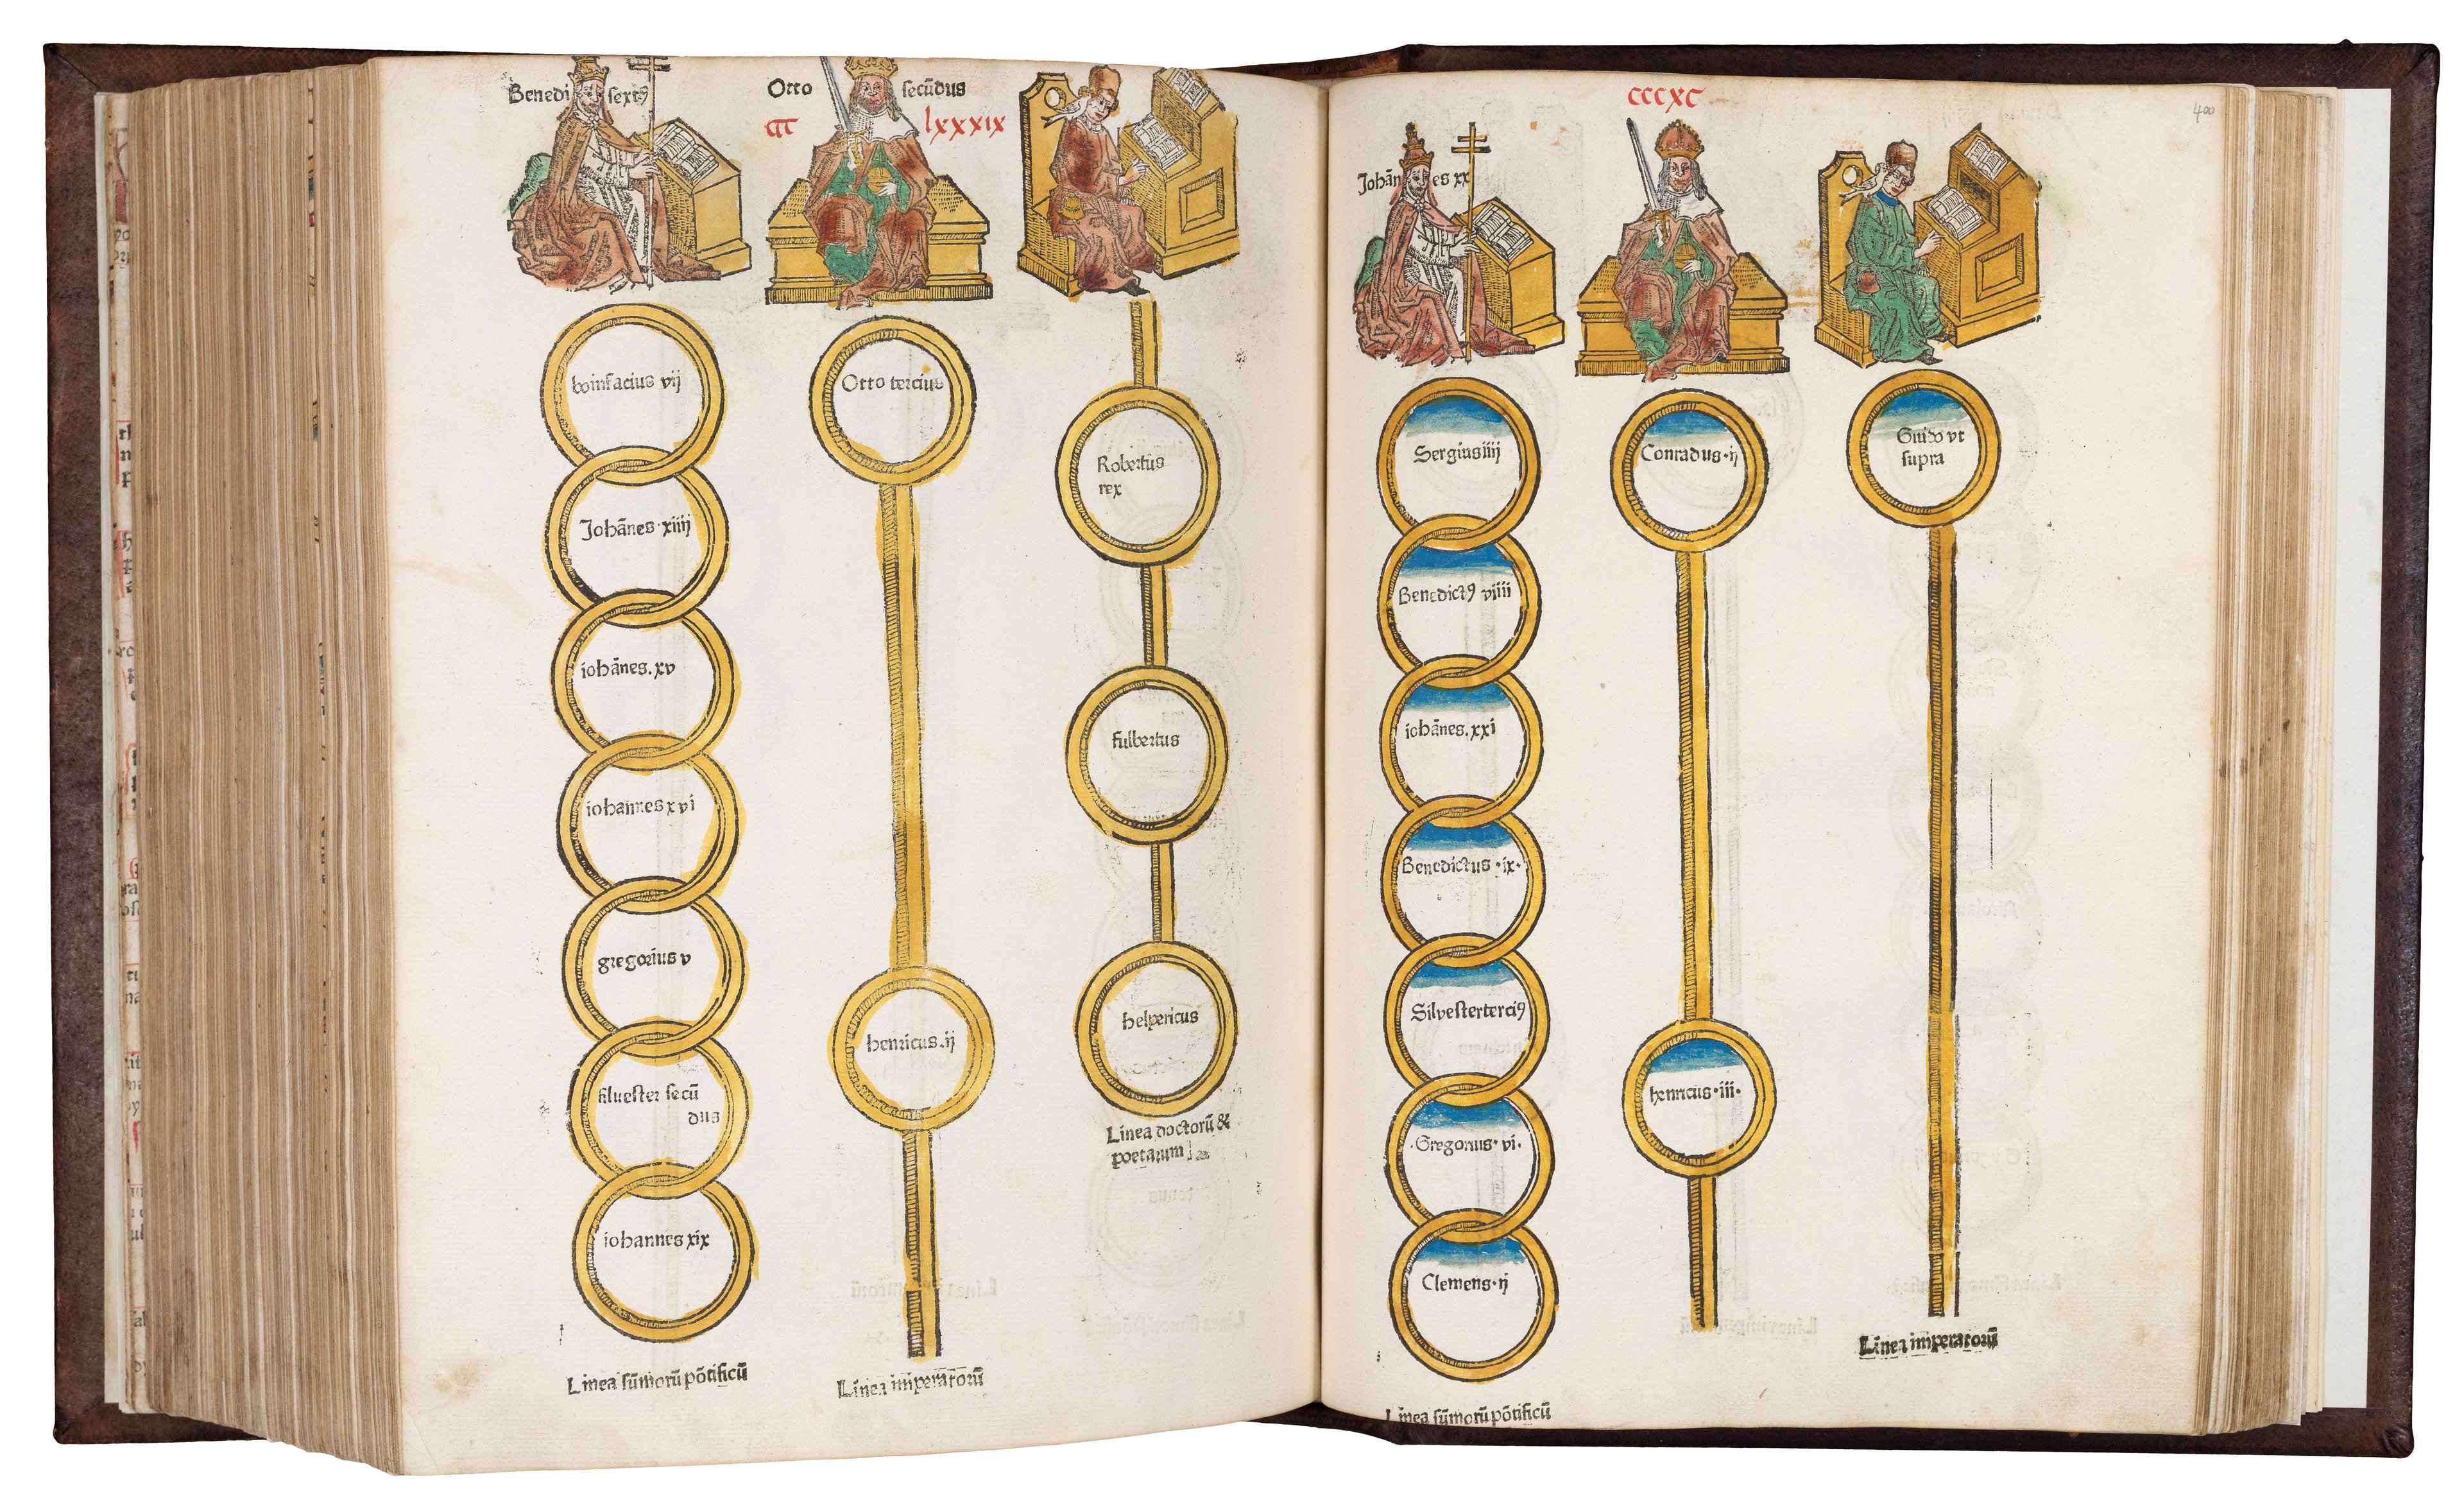 Excerpt from an Atlas in the Middle Ages displaying a family tree with lineage 